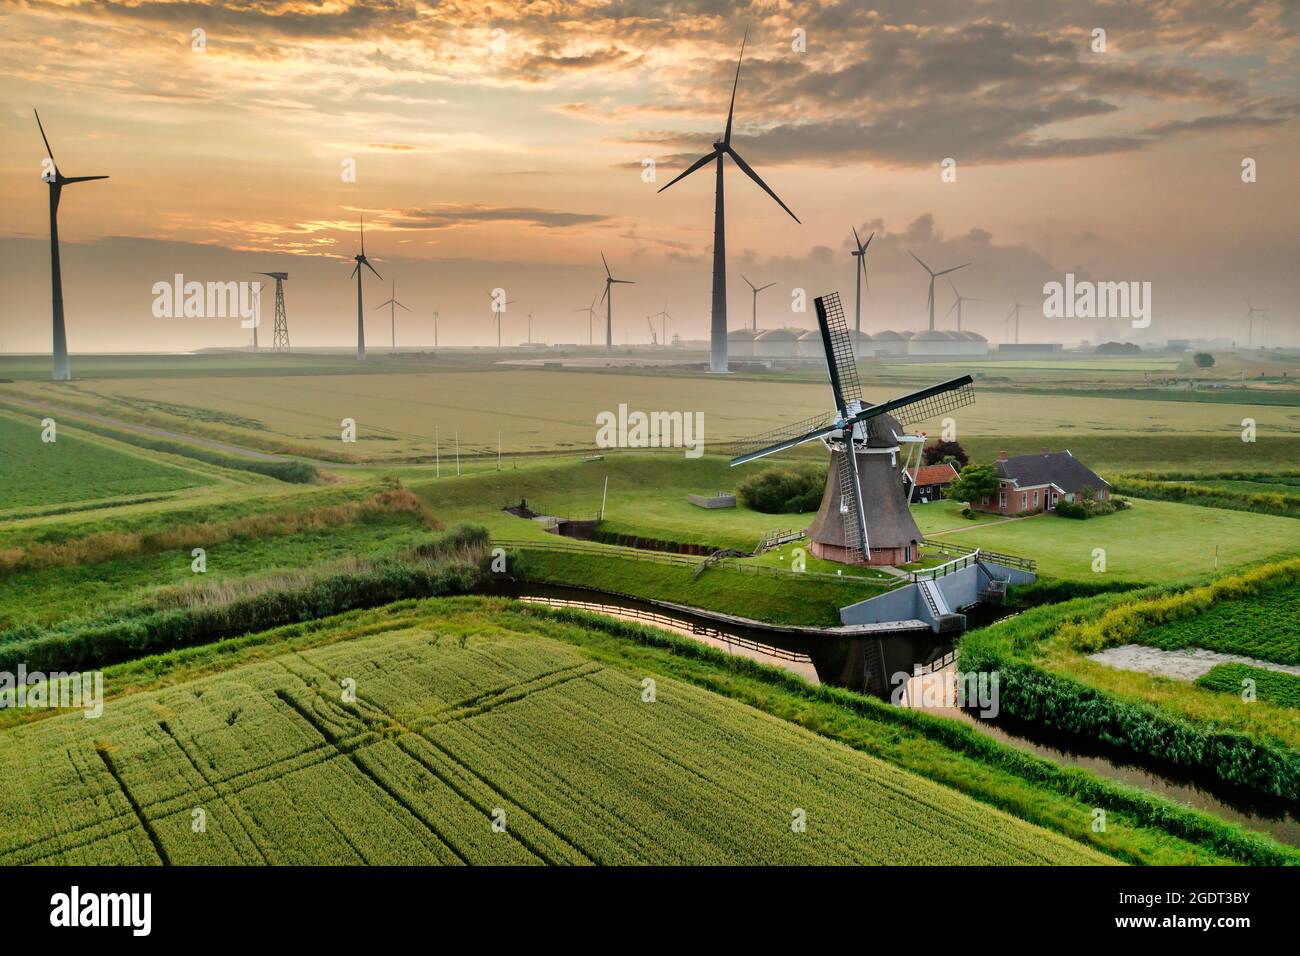 The Netherlands. Eemshaven. Wind park Eemsmond. Wind turbines. Background: ancient windmill (1897) called Goliath. Sunrise. Aerial. Stock Photo